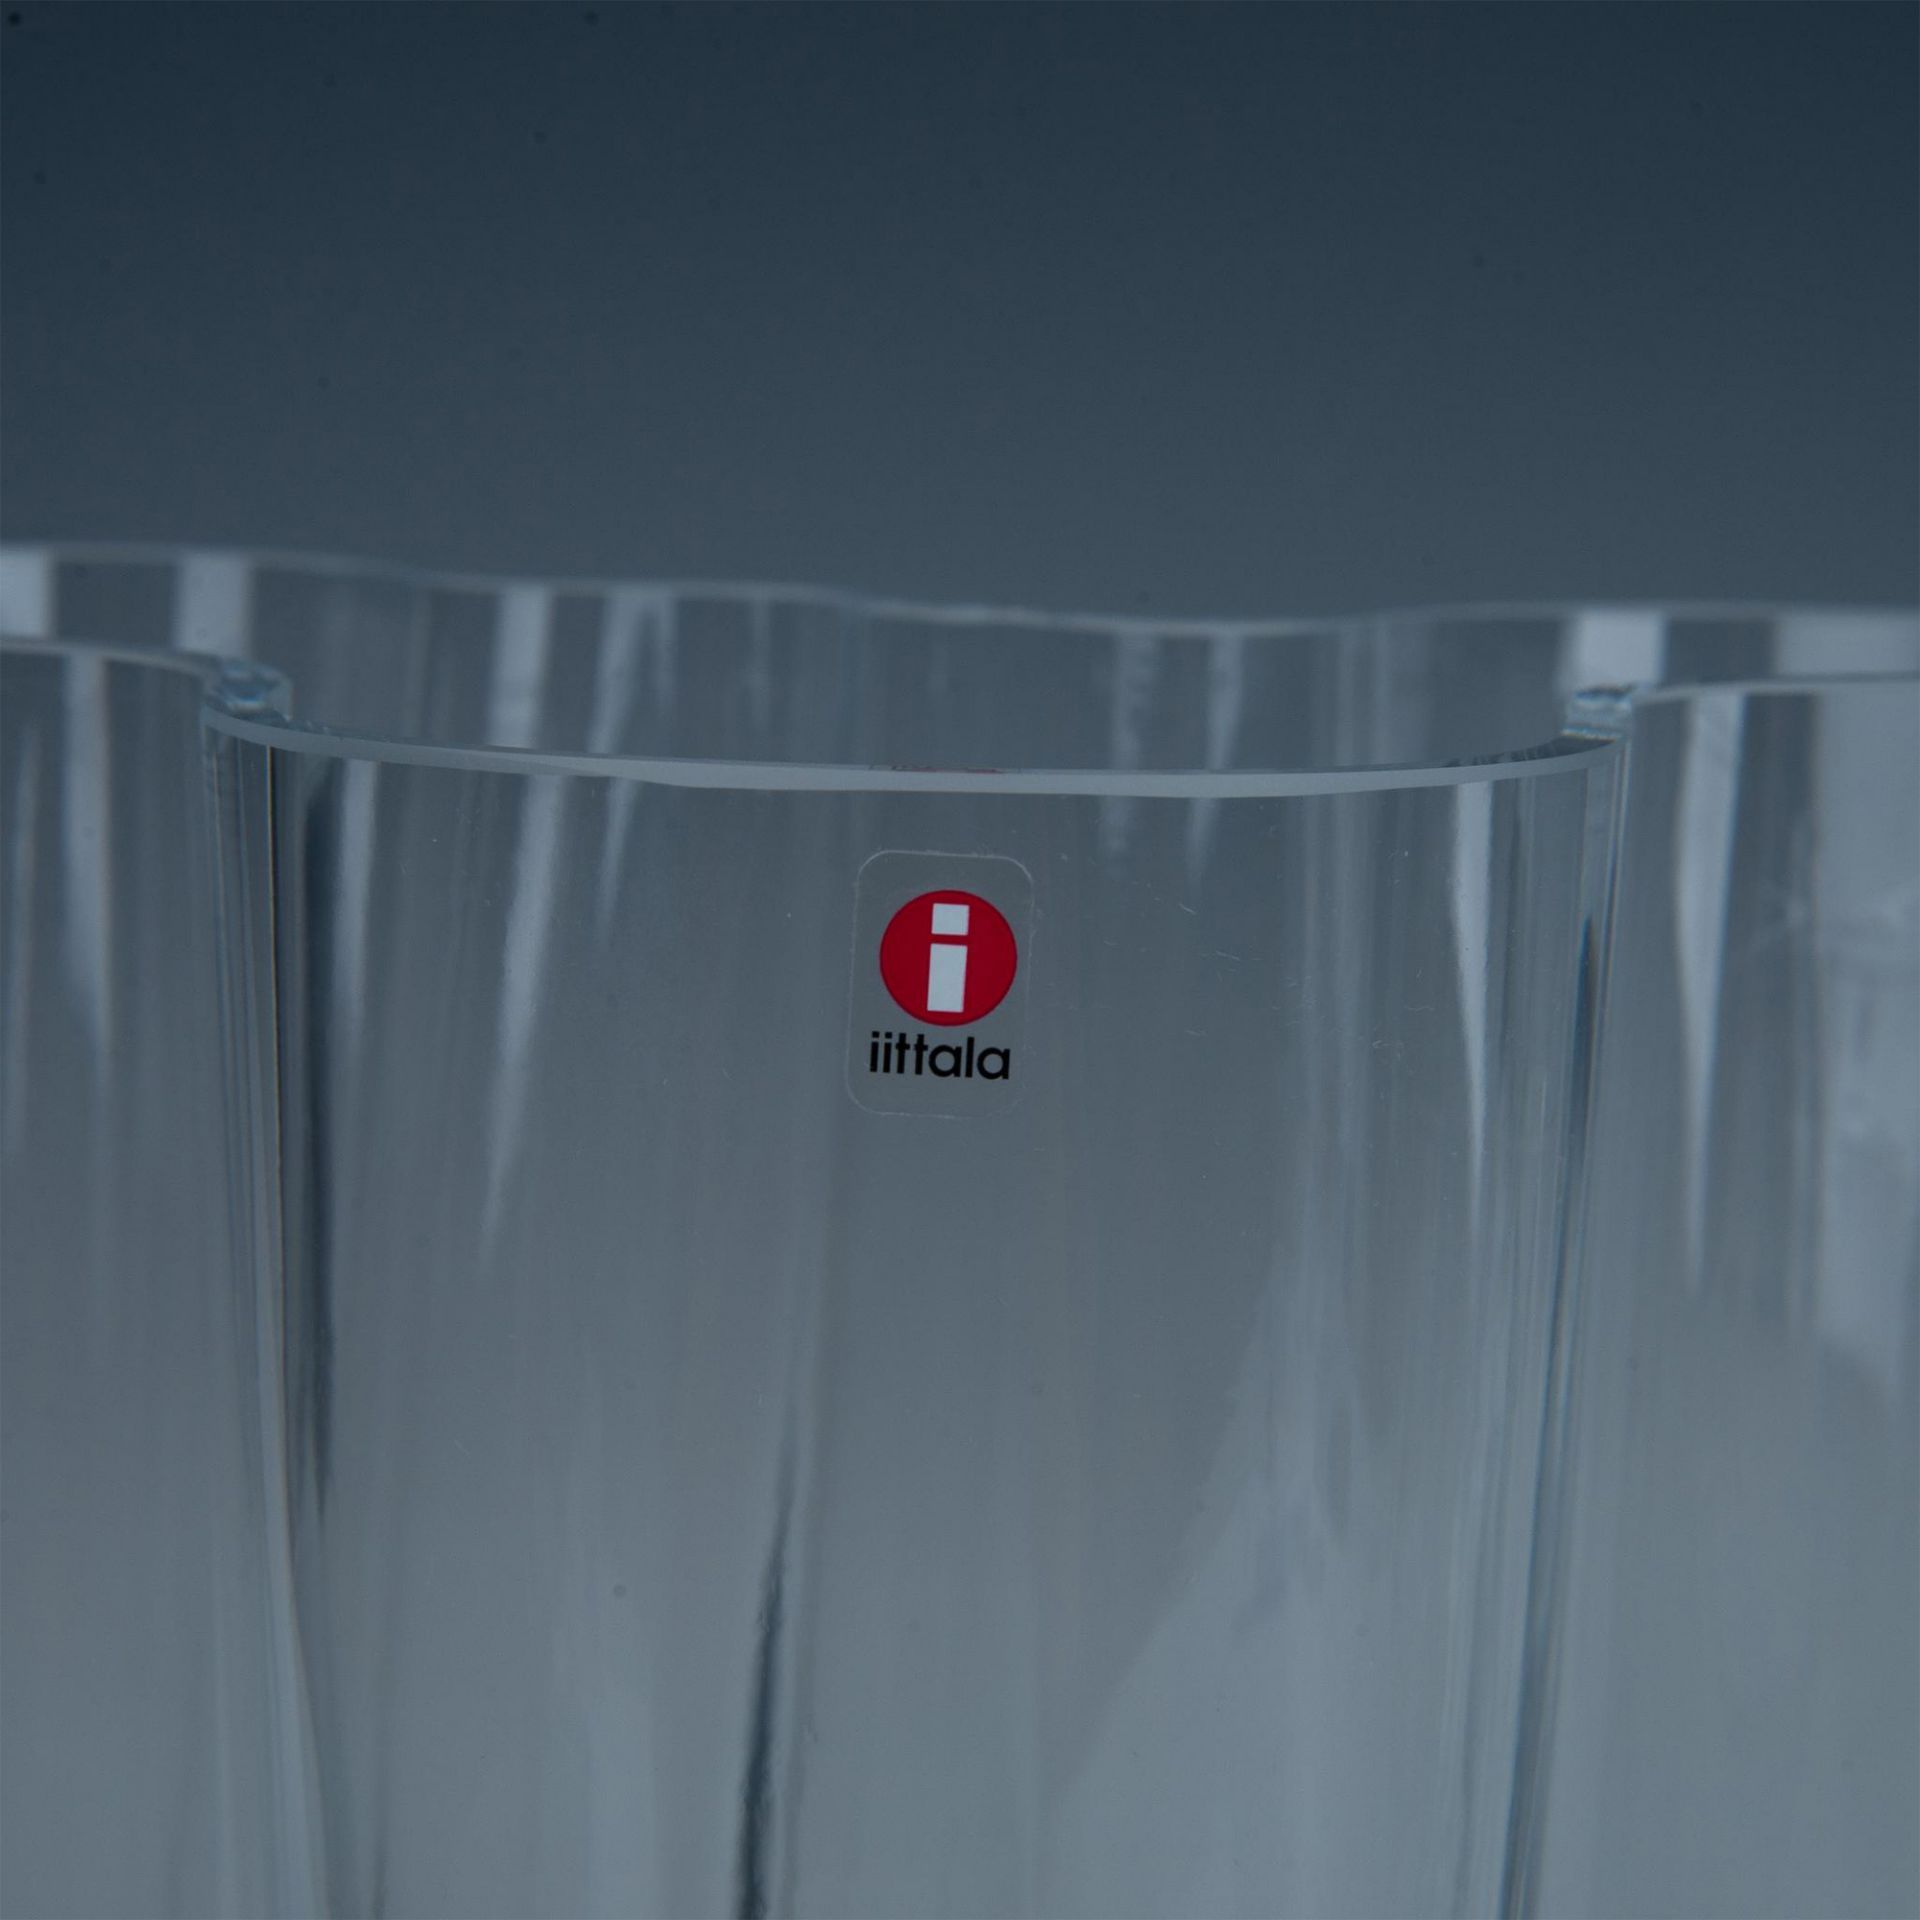 2pc Iittala Clear Glass Vases, Alvar Aalto Collection - Image 2 of 5